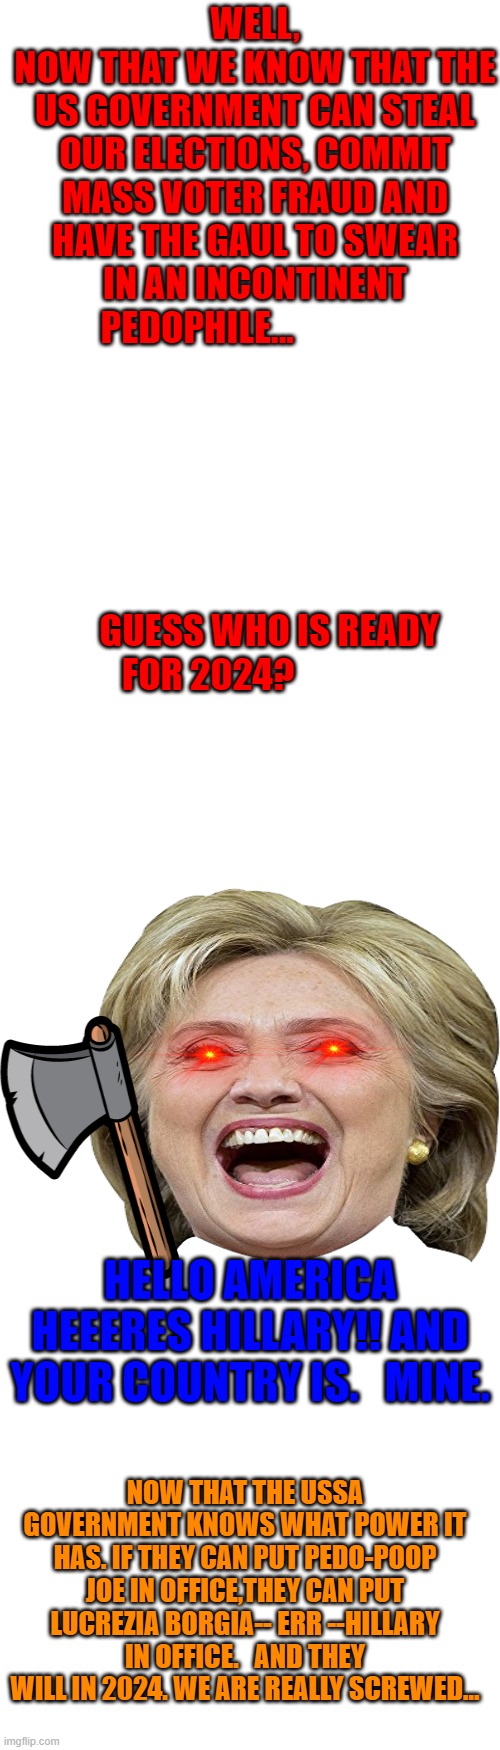 we are screwed in 2024 | WELL, NOW THAT WE KNOW THAT THE US GOVERNMENT CAN STEAL OUR ELECTIONS, COMMIT MASS VOTER FRAUD AND HAVE THE GAUL TO SWEAR IN AN INCONTINENT PEDOPHILE...                                                                                                      
                                                         GUESS WHO IS READY FOR 2024? HELLO AMERICA HEEERES HILLARY!! AND YOUR COUNTRY IS.   MINE. NOW THAT THE USSA GOVERNMENT KNOWS WHAT POWER IT HAS. IF THEY CAN PUT PEDO-POOP JOE IN OFFICE,THEY CAN PUT LUCREZIA BORGIA-- ERR --HILLARY IN OFFICE.   AND THEY WILL IN 2024. WE ARE REALLY SCREWED... | image tagged in long blank white template,oh shit moment | made w/ Imgflip meme maker